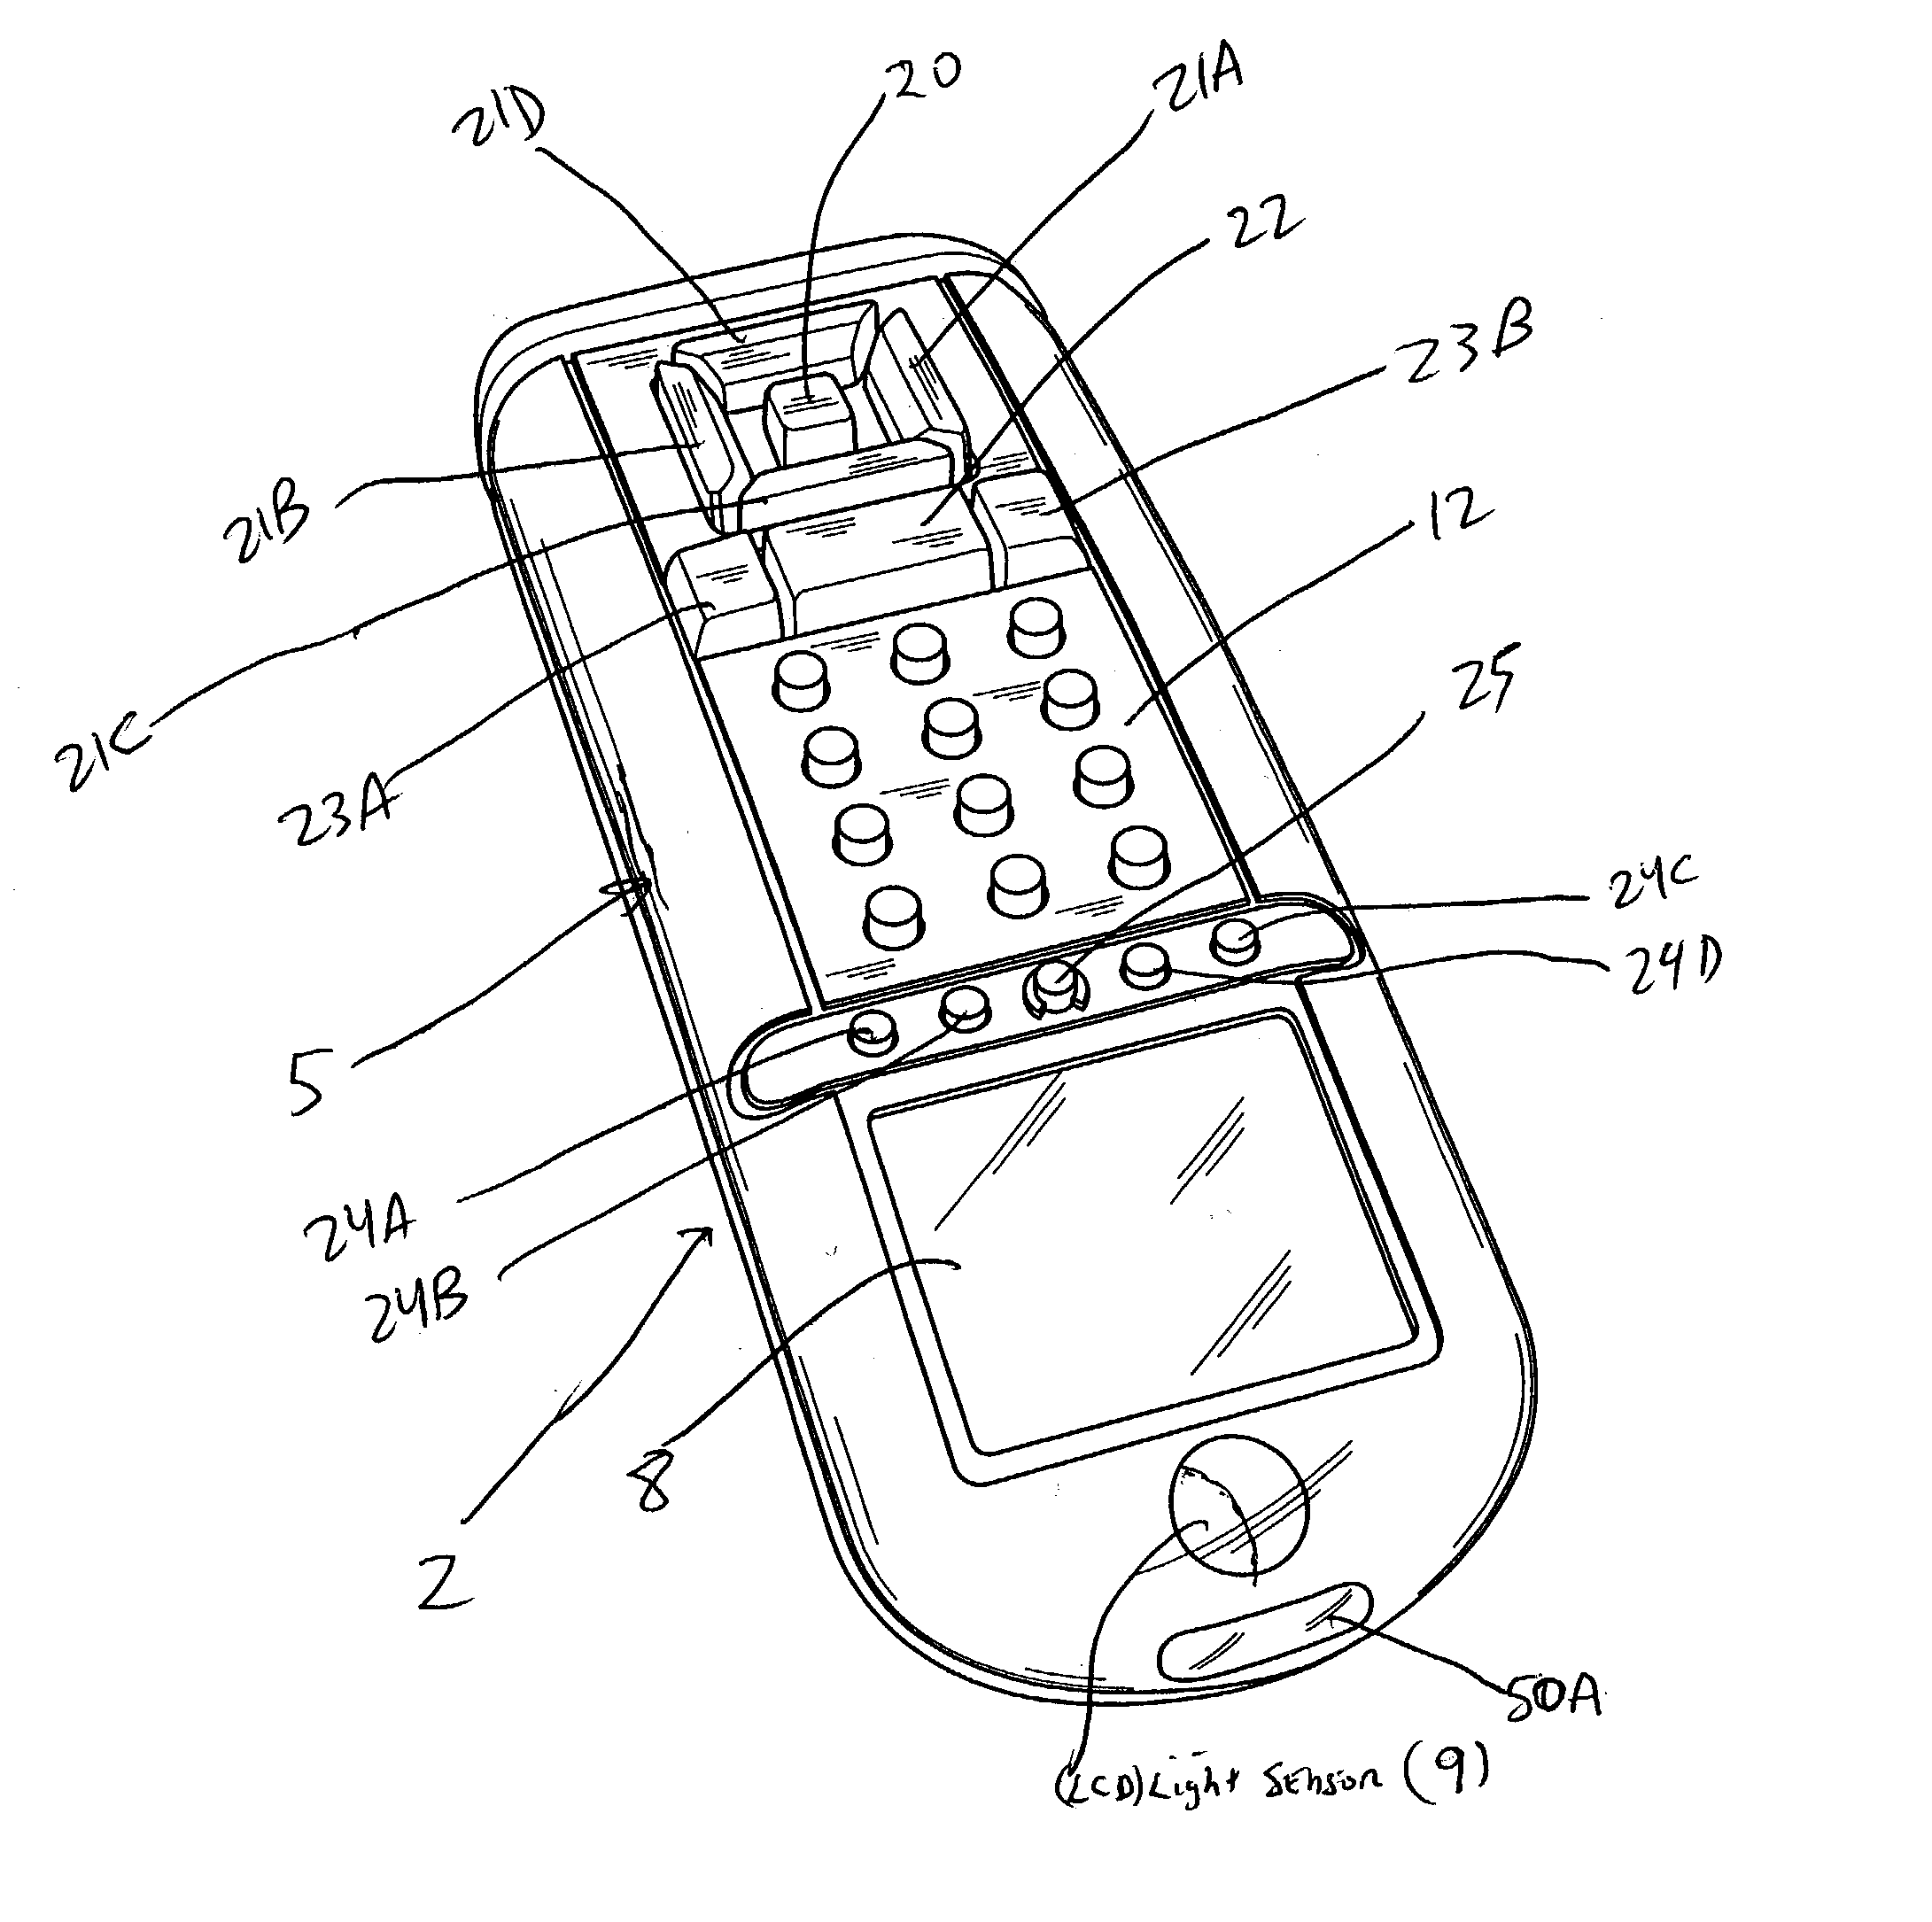 Wireless bar code symbol driven portable data terminal (PDT) system adapted for single handed operation